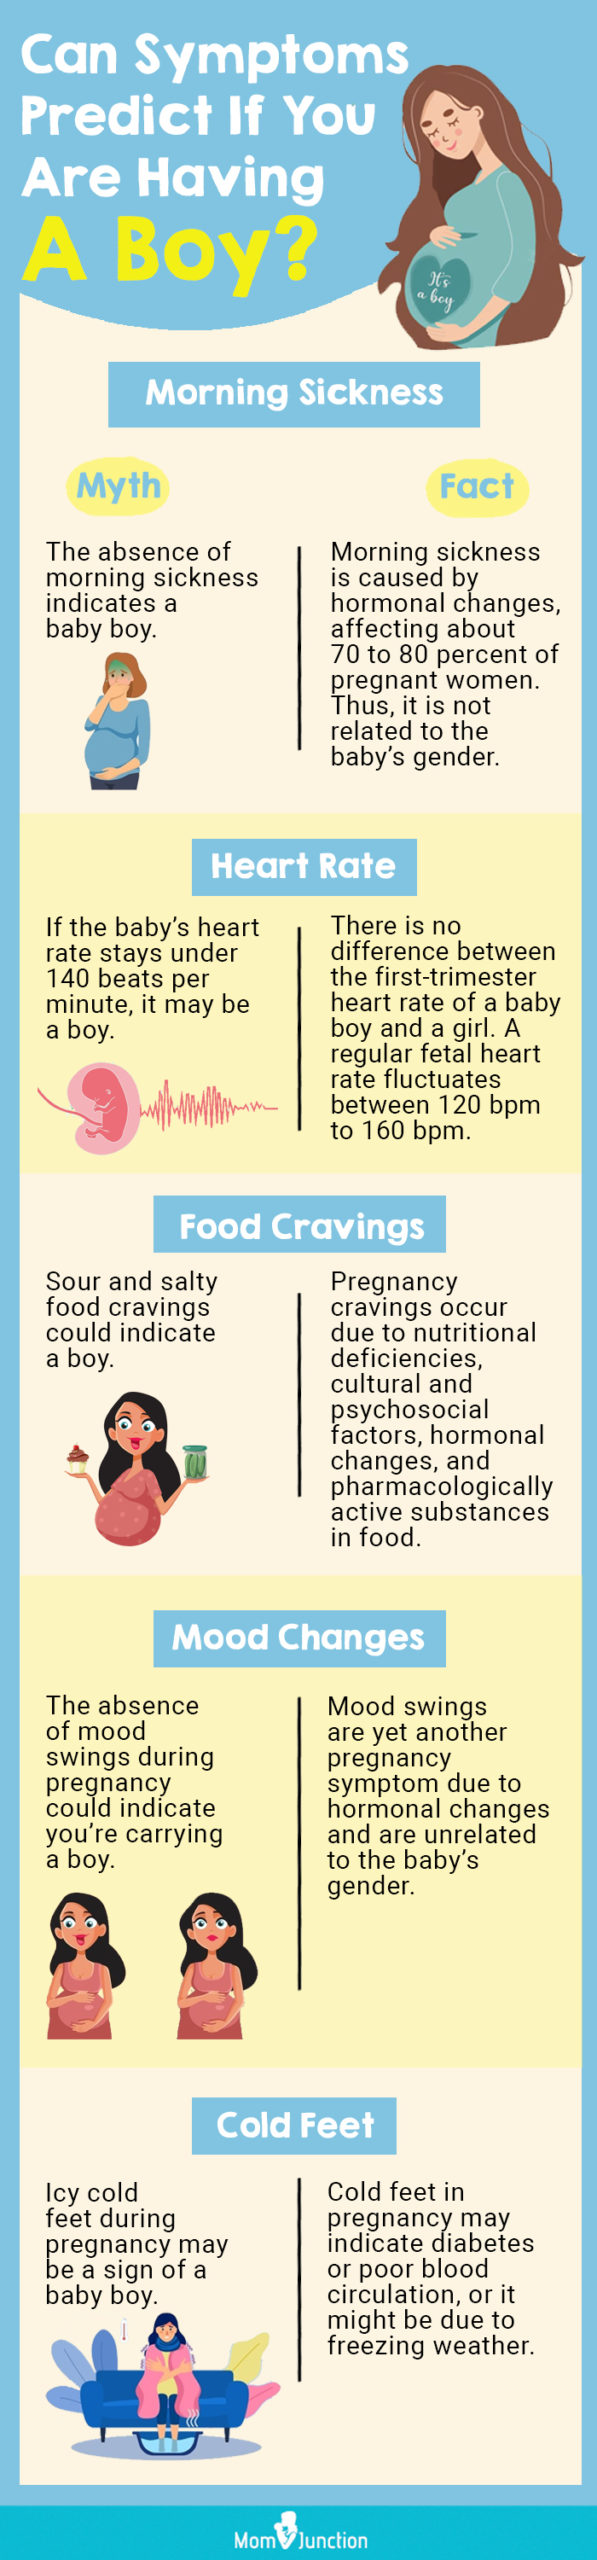 can symptoms predict if you are having a boy (infographic)